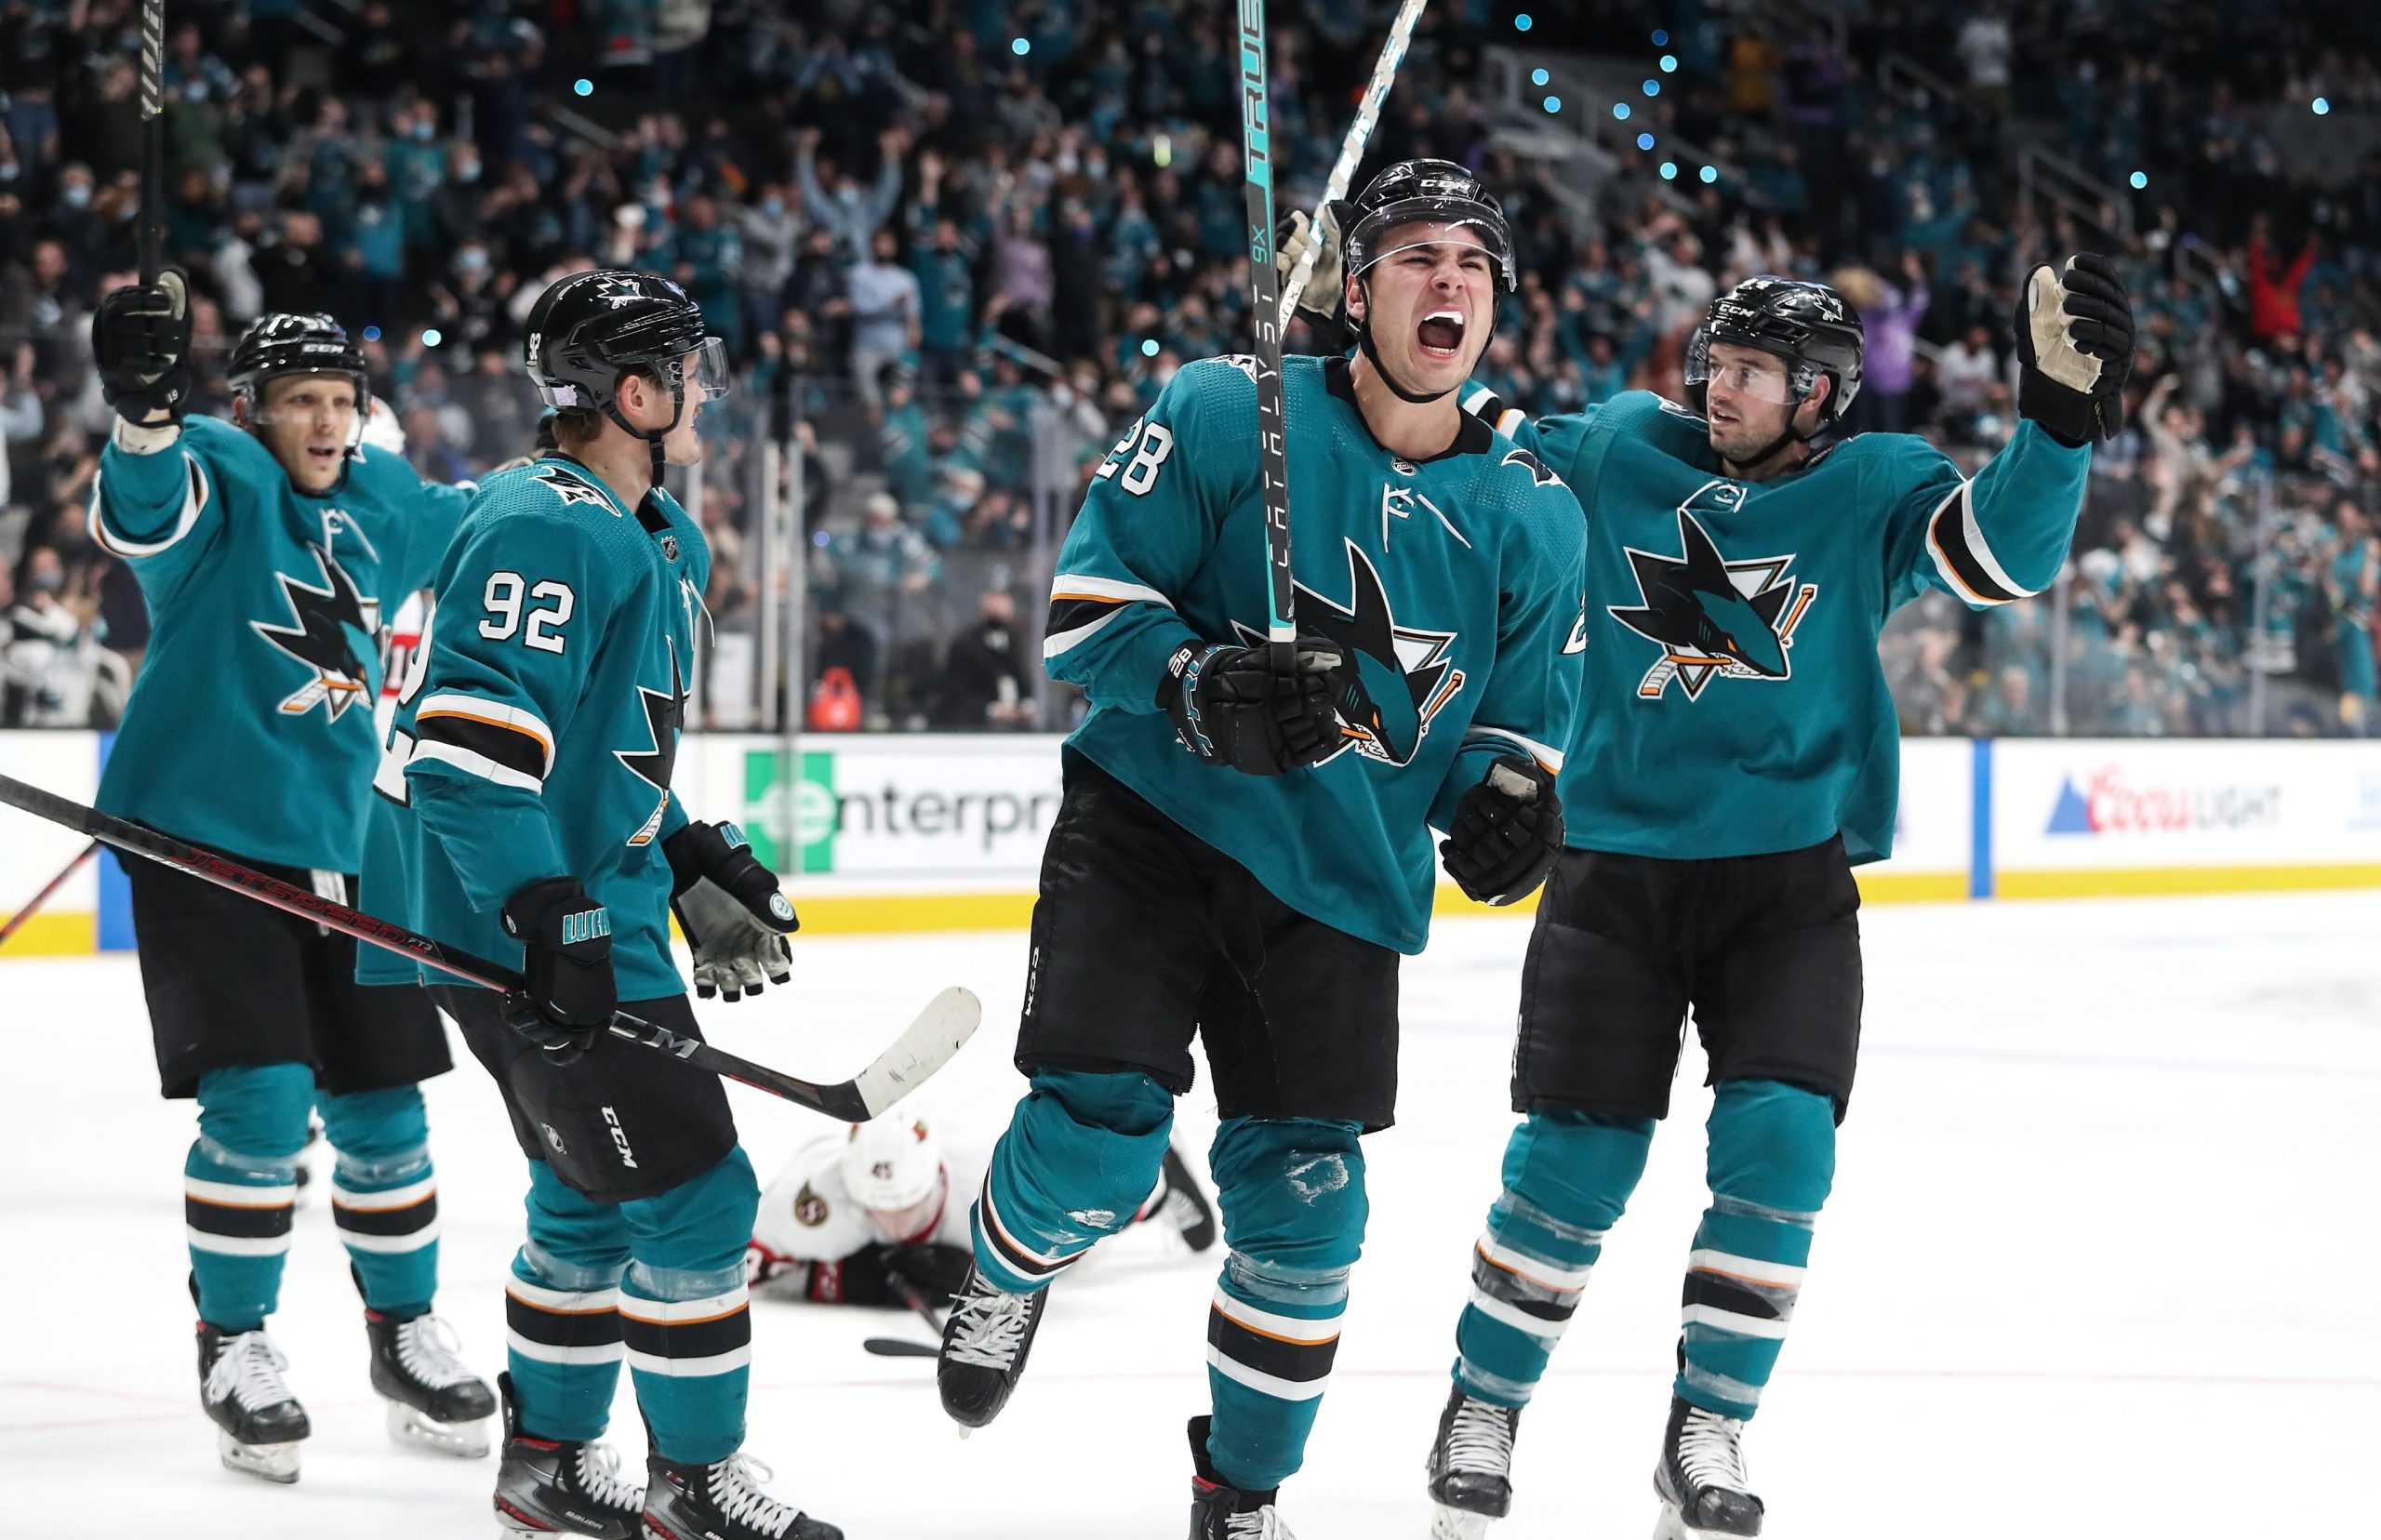 Criticism of Sharks' Hertl by NHL Establishment Is Absurd